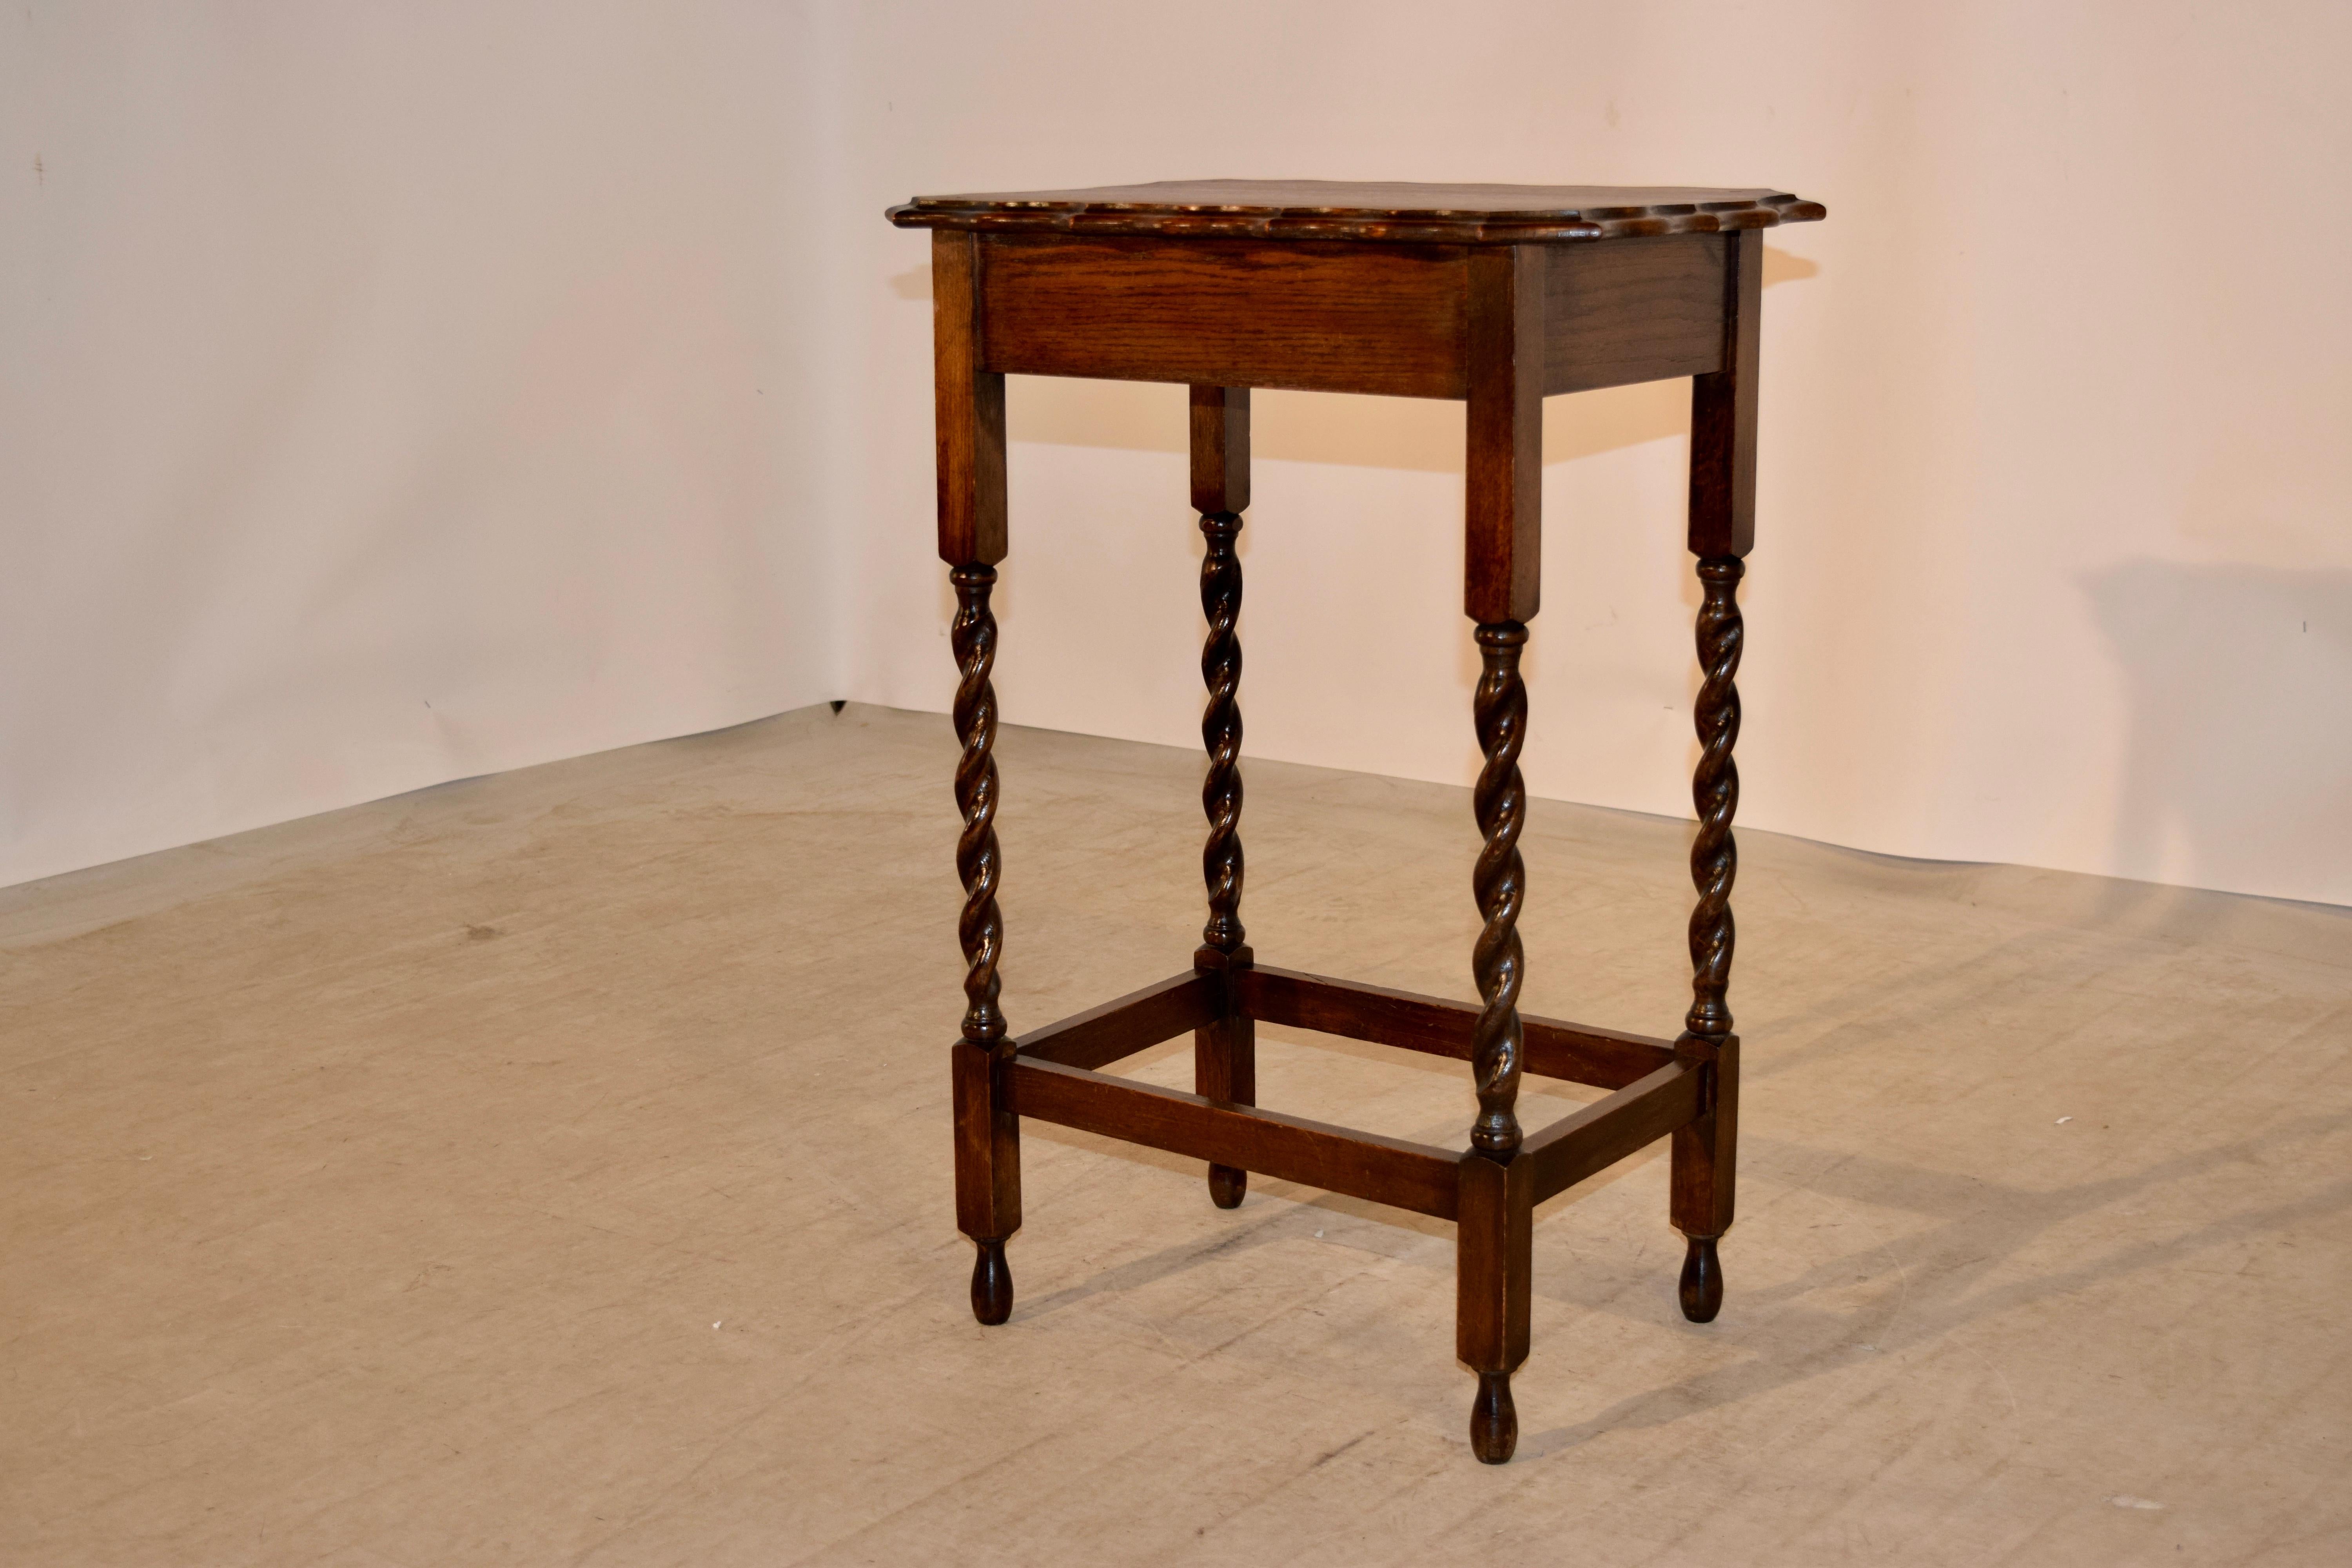 English oak side table with an exquisitely scalloped and beveled edge following down to a simple apron and supported on hand turned barley twist legs joined by stretchers and raised on hand turned feet, circa 1900.